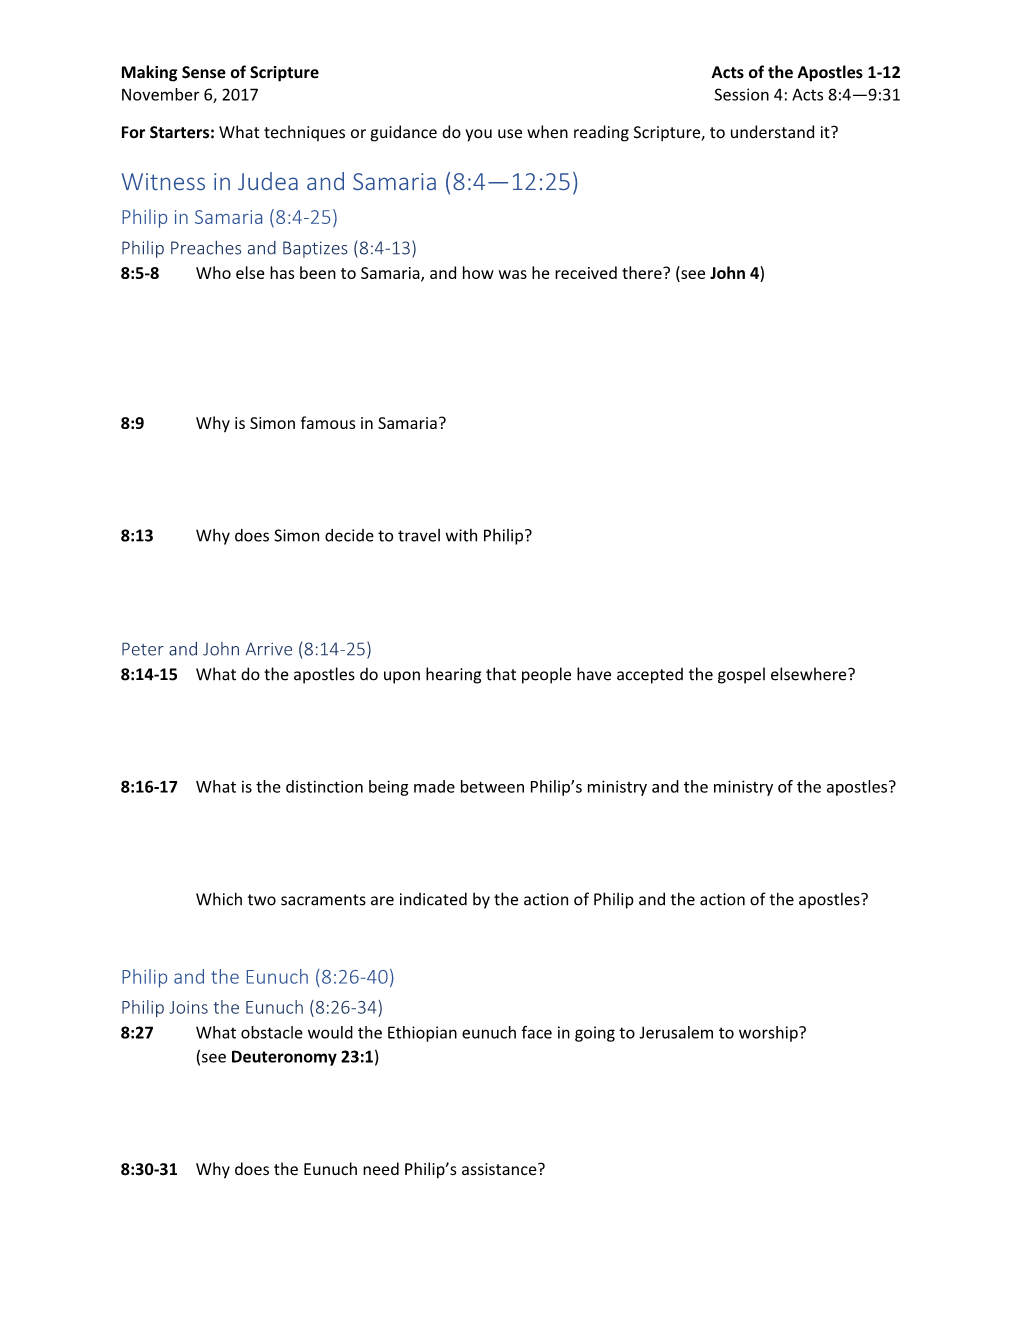 Acts 8-9 Study Guide